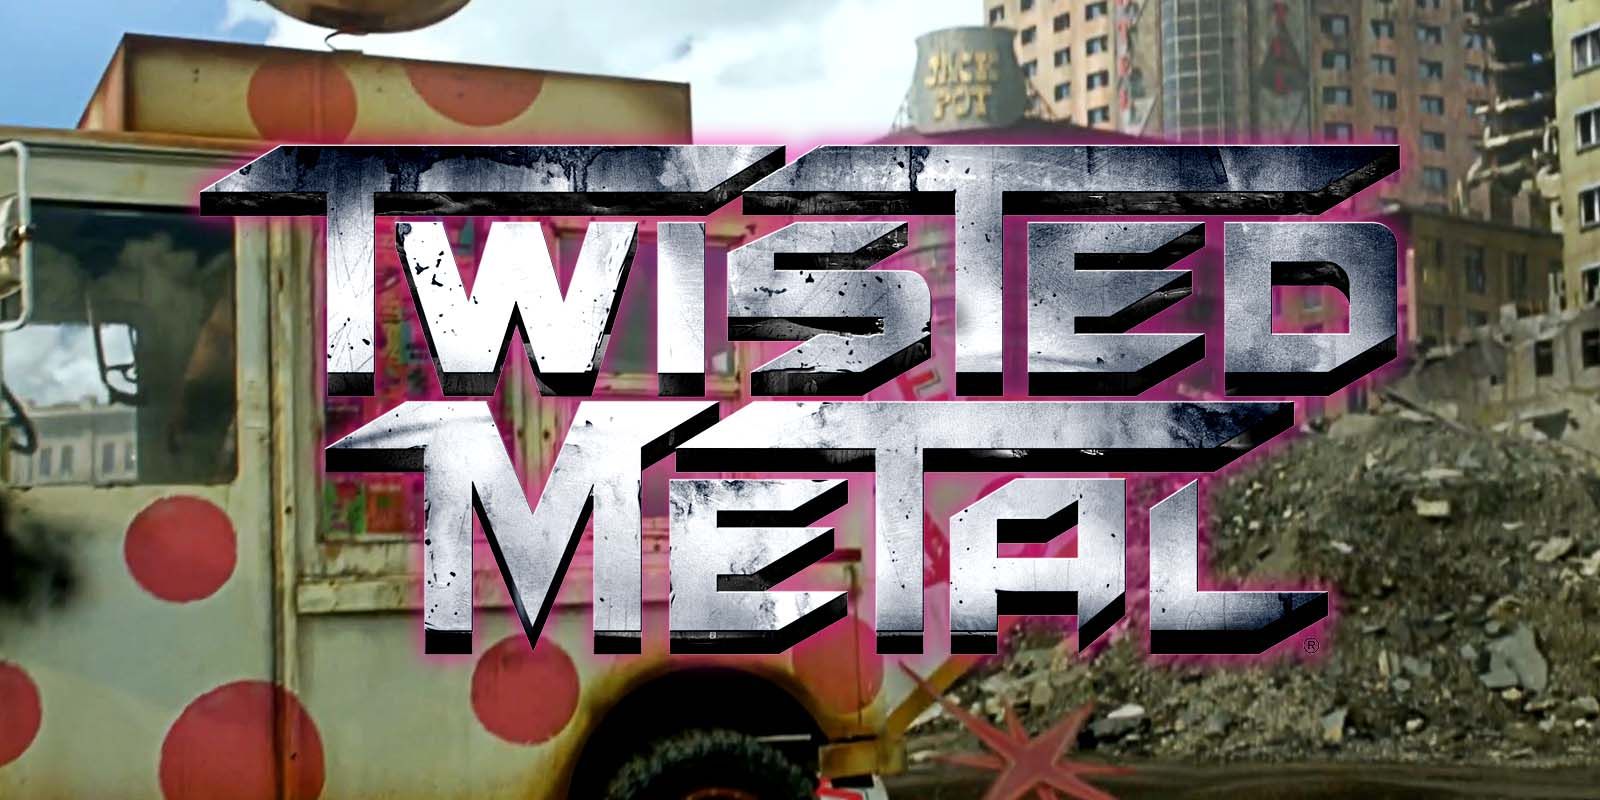 Peacock Orders 'Twisted Metal' Comedy Series Starring Anthony